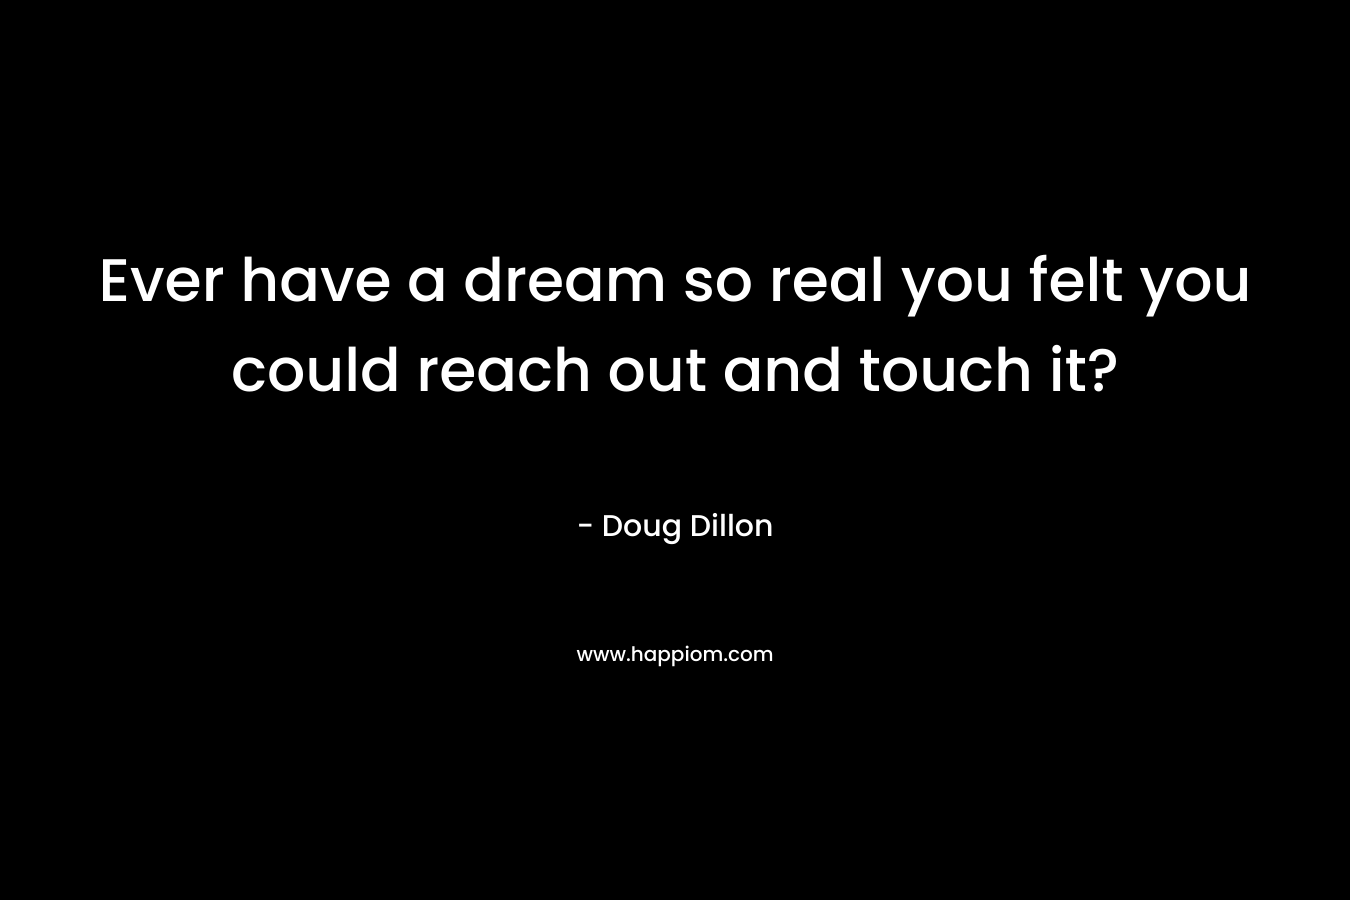 Ever have a dream so real you felt you could reach out and touch it?